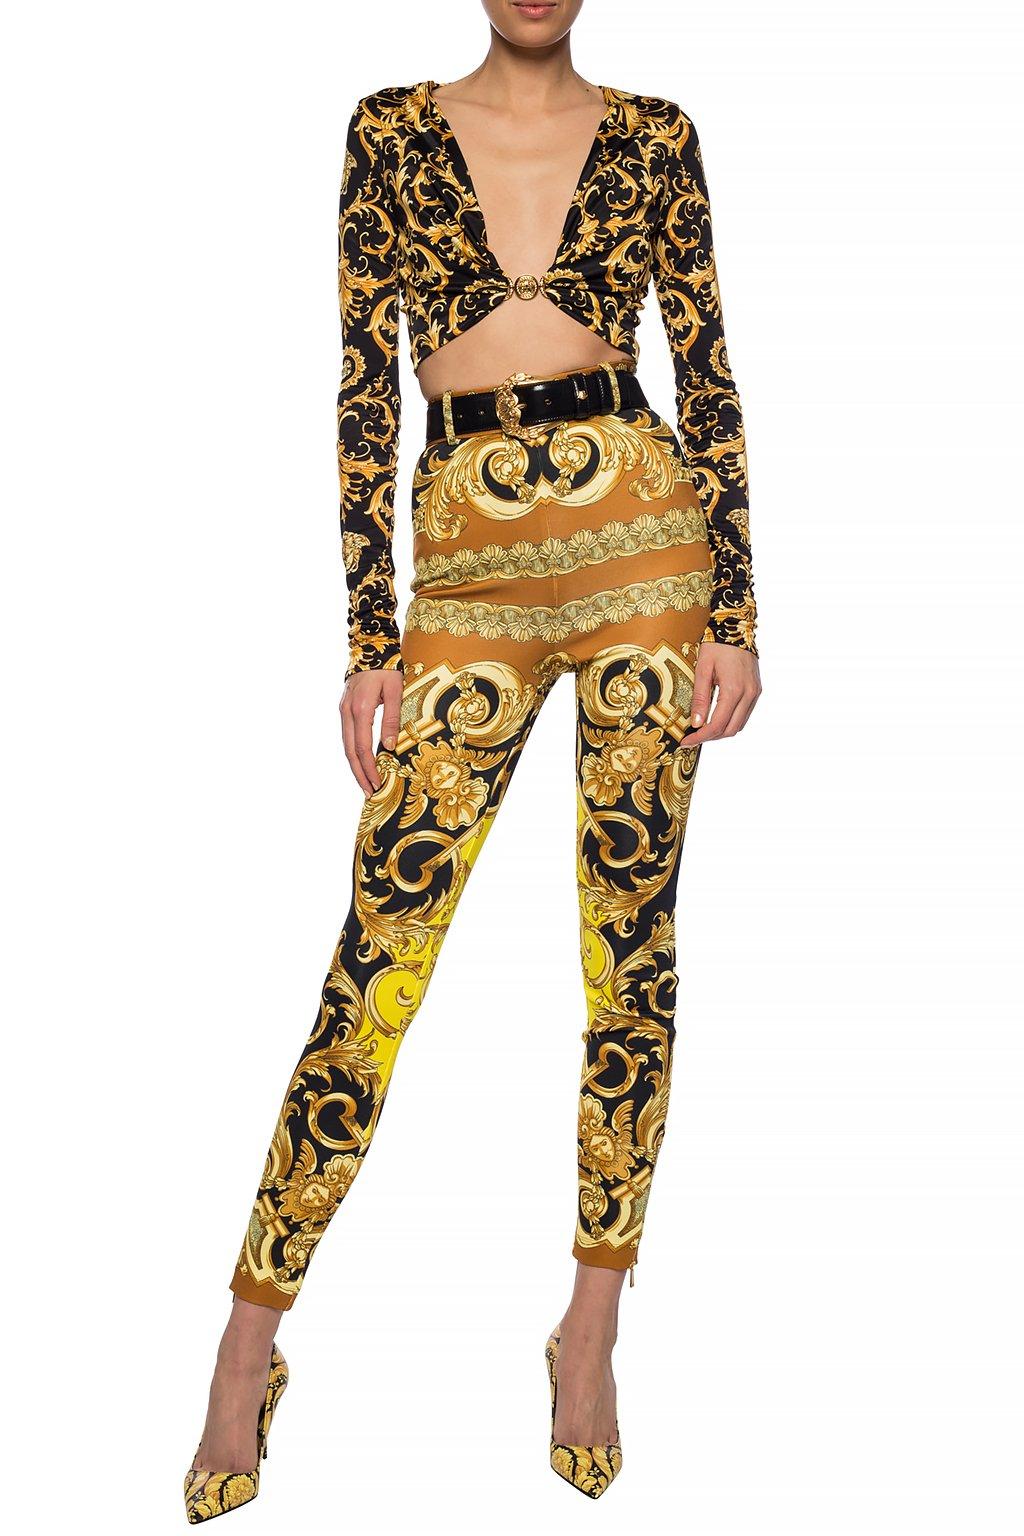 Versace FW19 Barocco Femme Print Formal Knit Leggings

These Versace leggings feature the Barocco Femme print, belt loops, gold-tone zippers at ankles, and high waist. Brand new with tags. Made in Italy.

Size: 38 (IT)

Composition:
96% Viscose, 4%